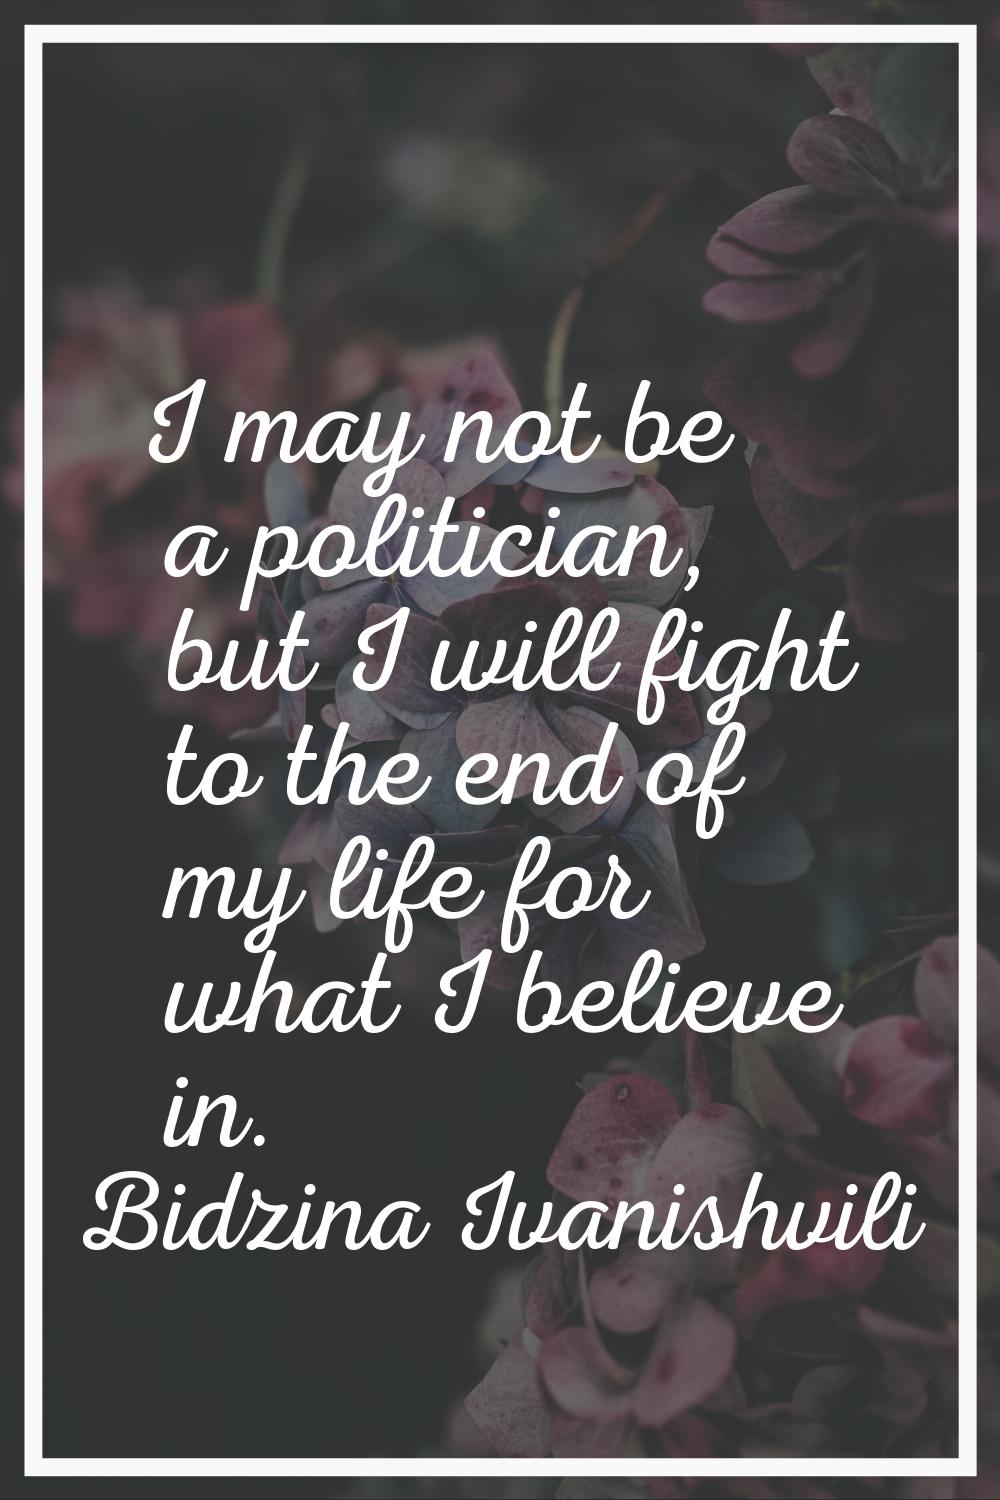 I may not be a politician, but I will fight to the end of my life for what I believe in.